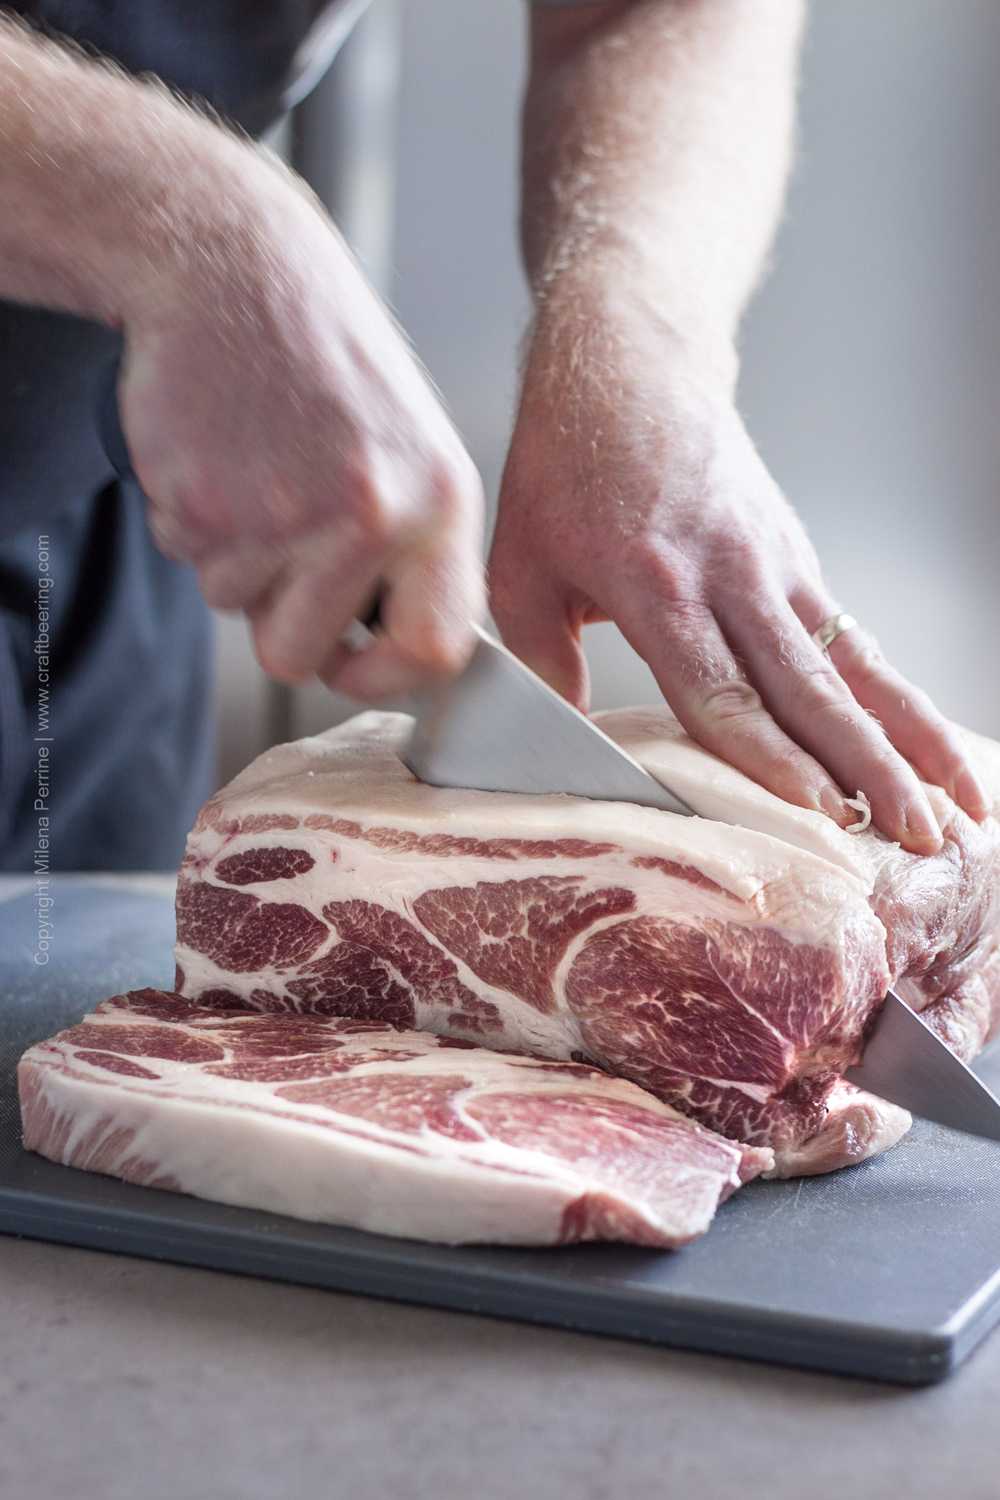 How to cut steaks from pork shoulder 